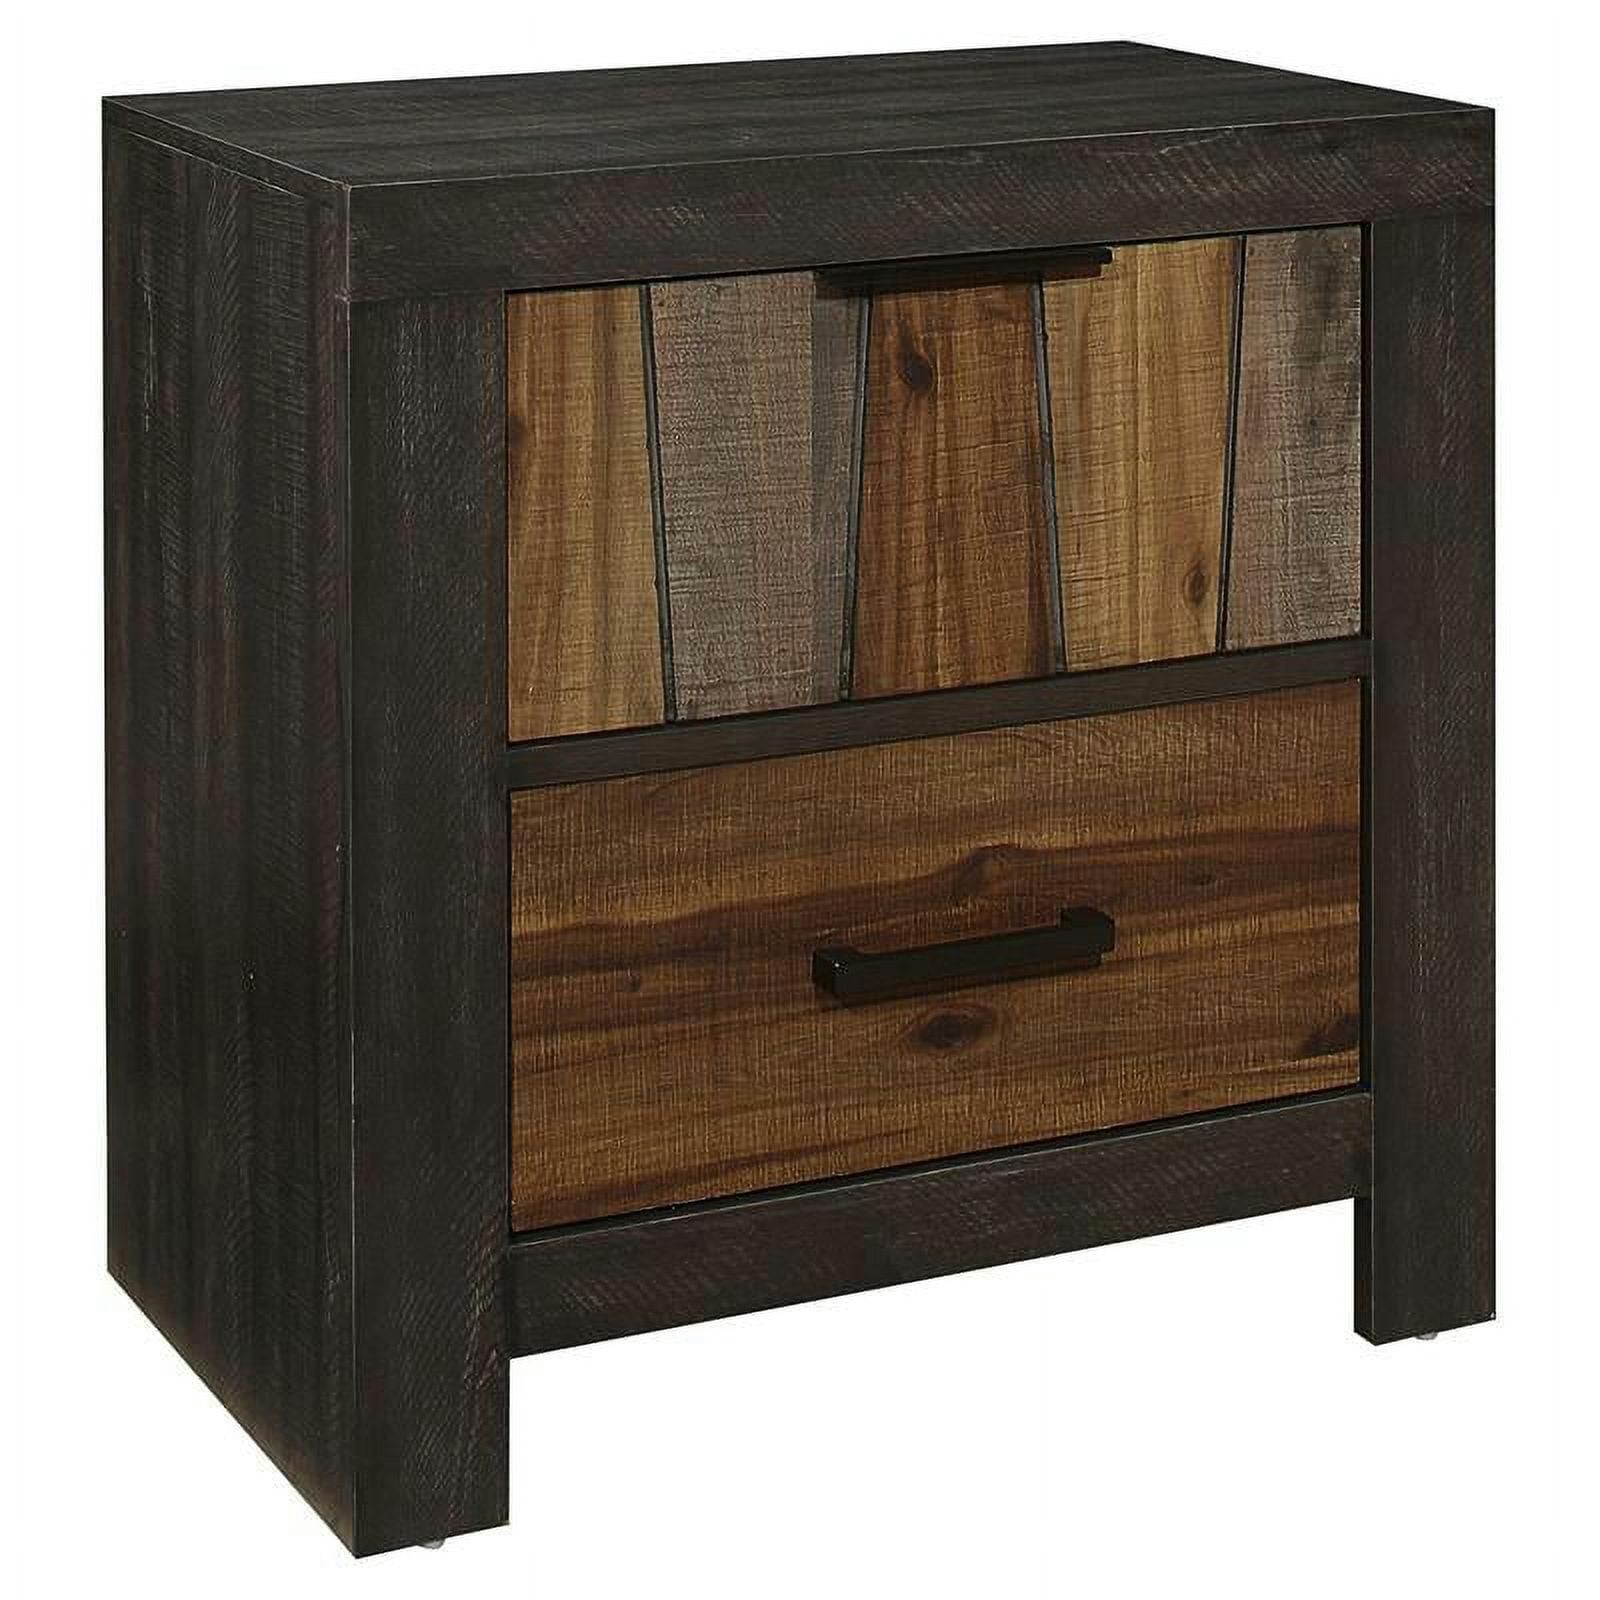 Transitional Multi-Tone 2-Drawer Nightstand with Metal Glides